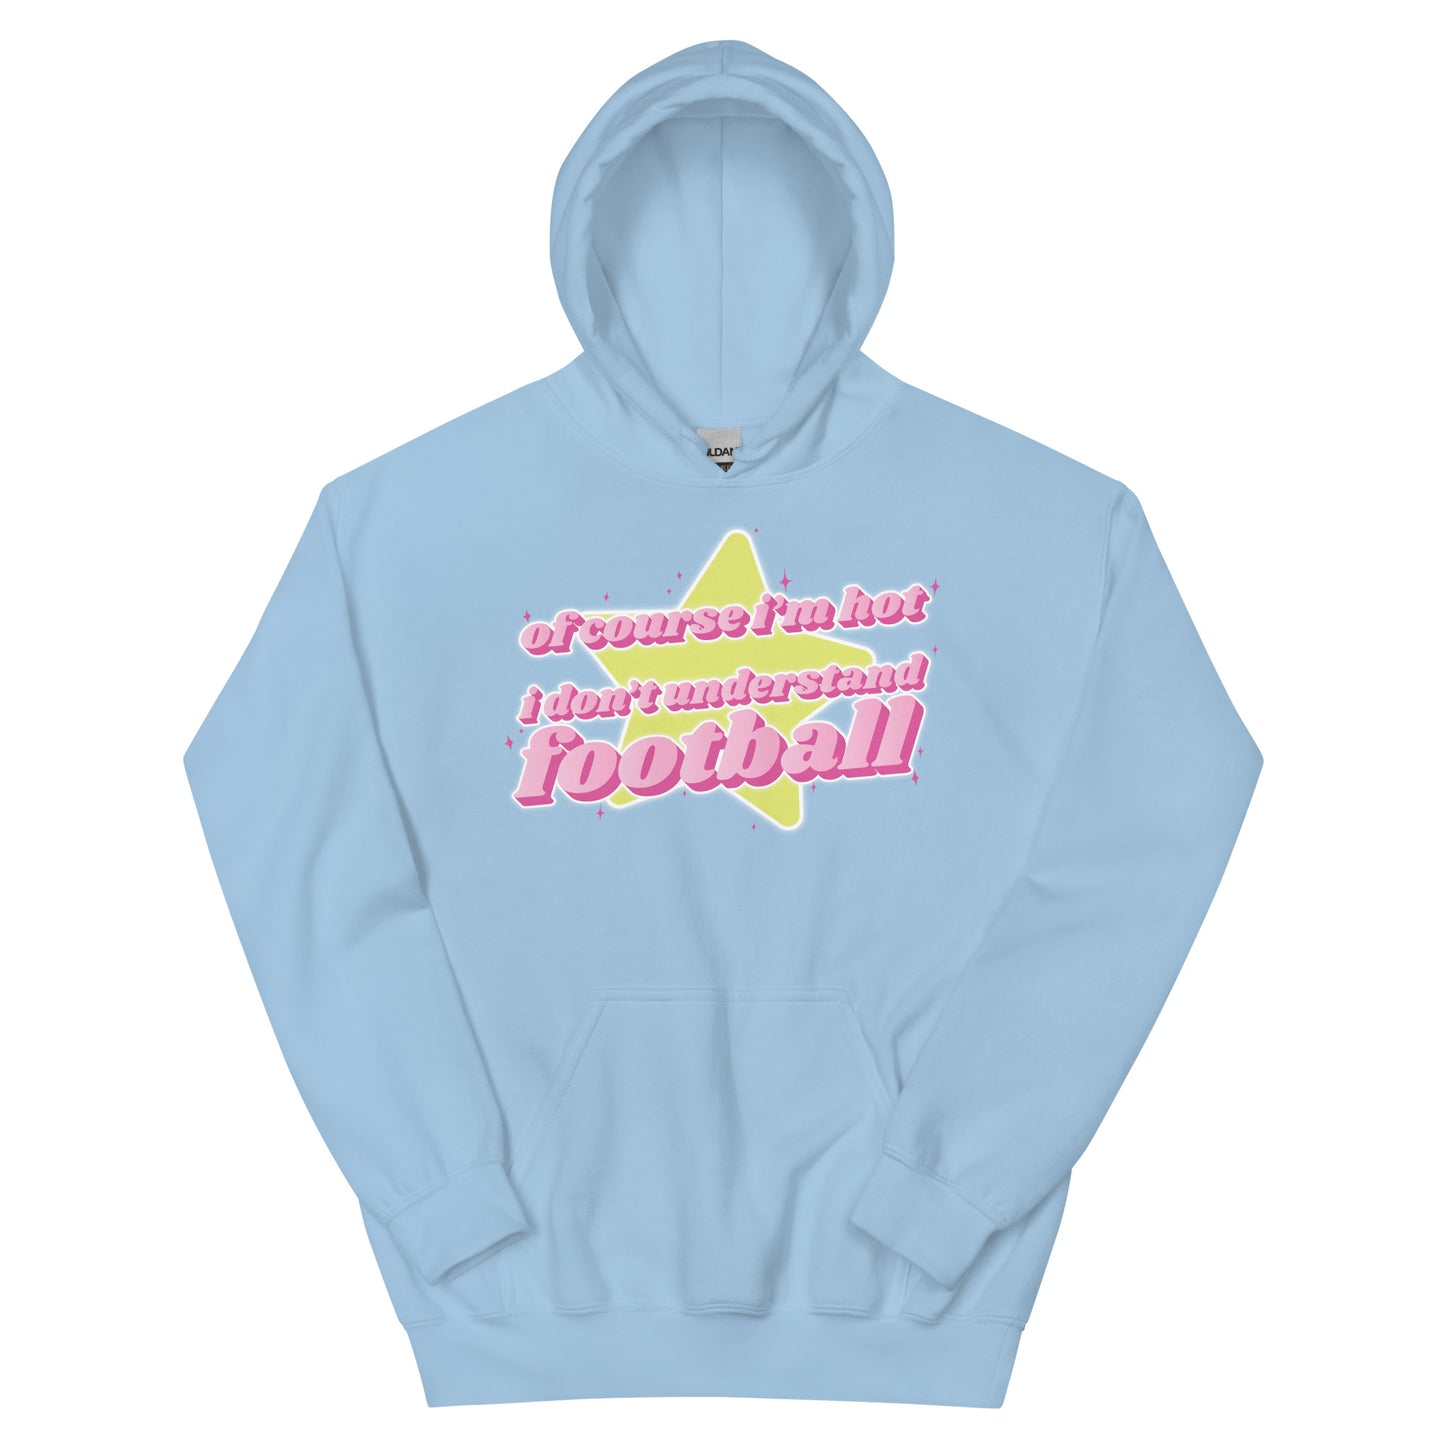 Of Course I'm Hot (Football) Unisex Hoodie